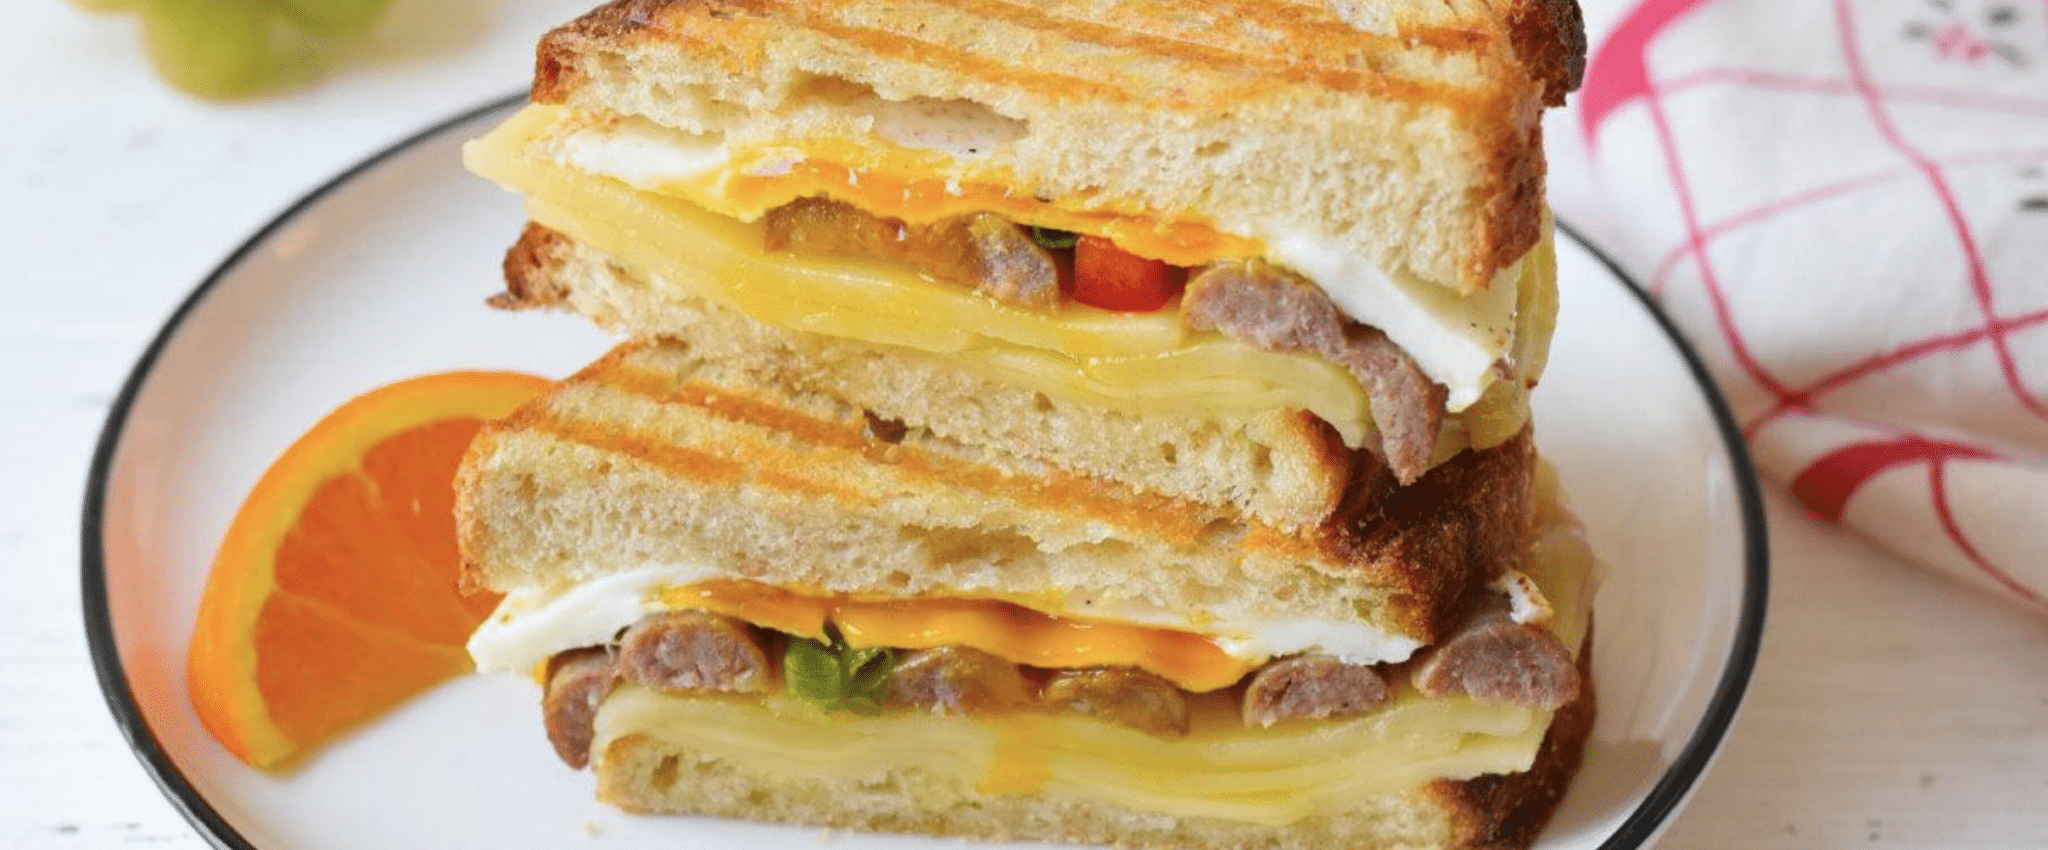 Swaggerty's Sausage links on a grilled cheese sandwich, plated with an orange slice.